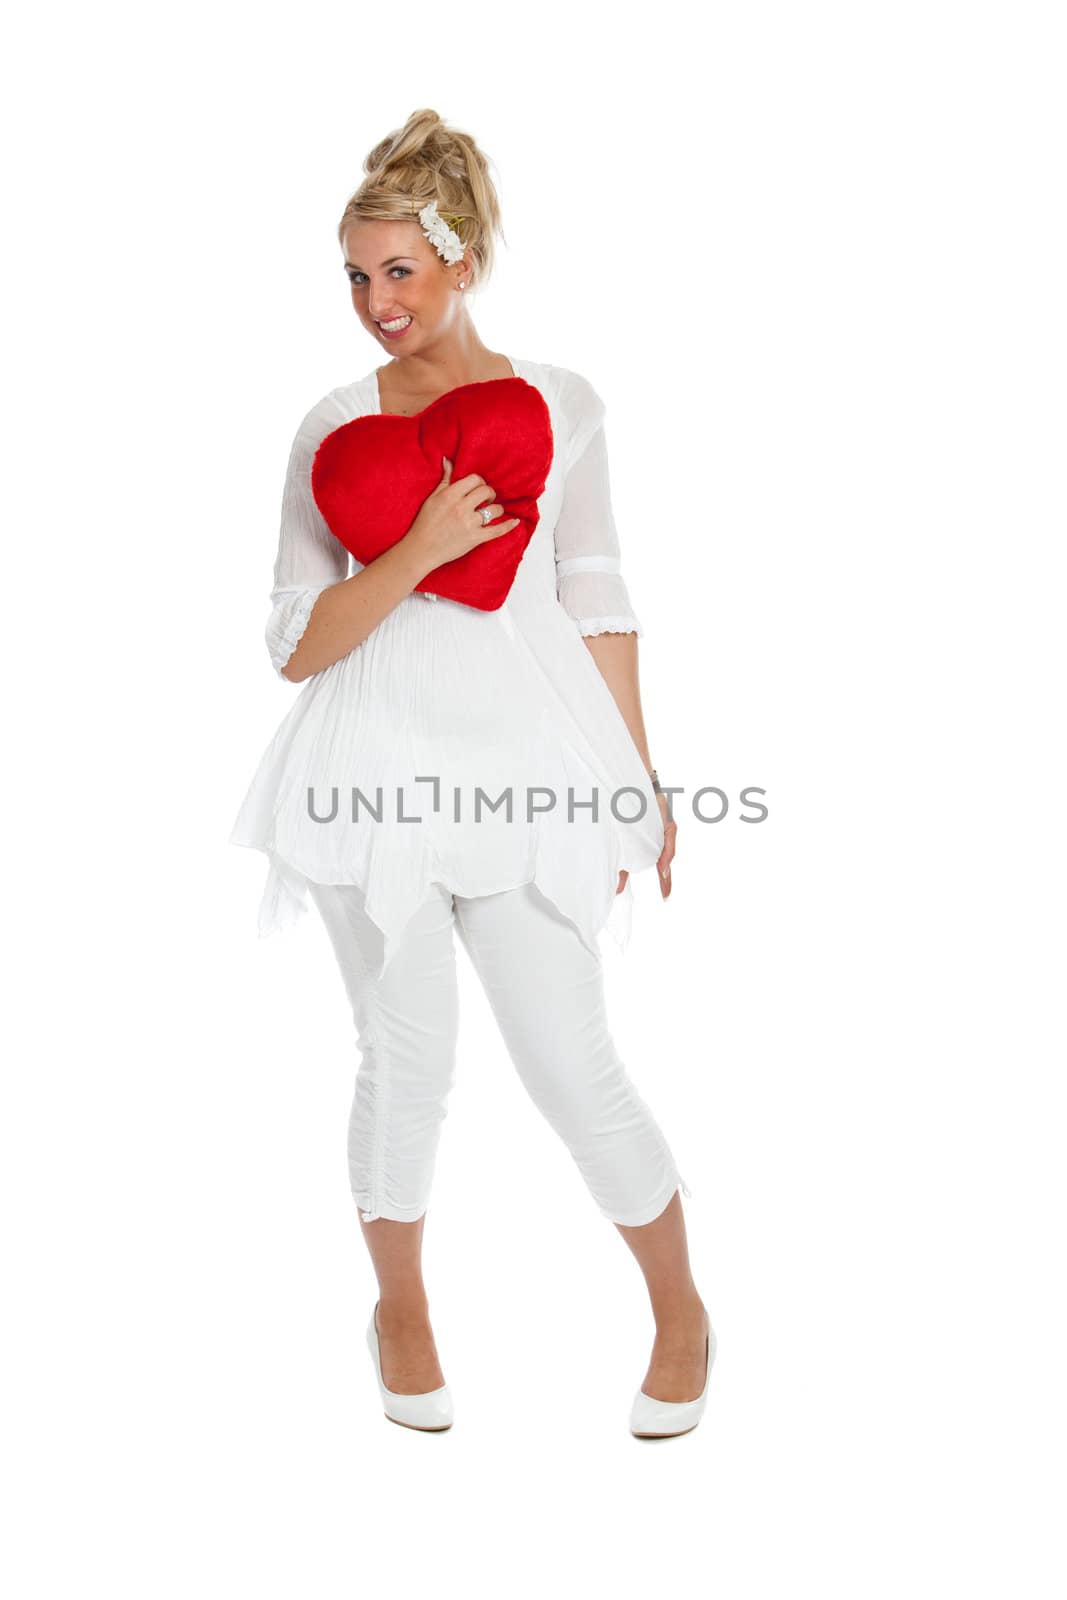 Pretty blond girl with big red valentine heart against her chest